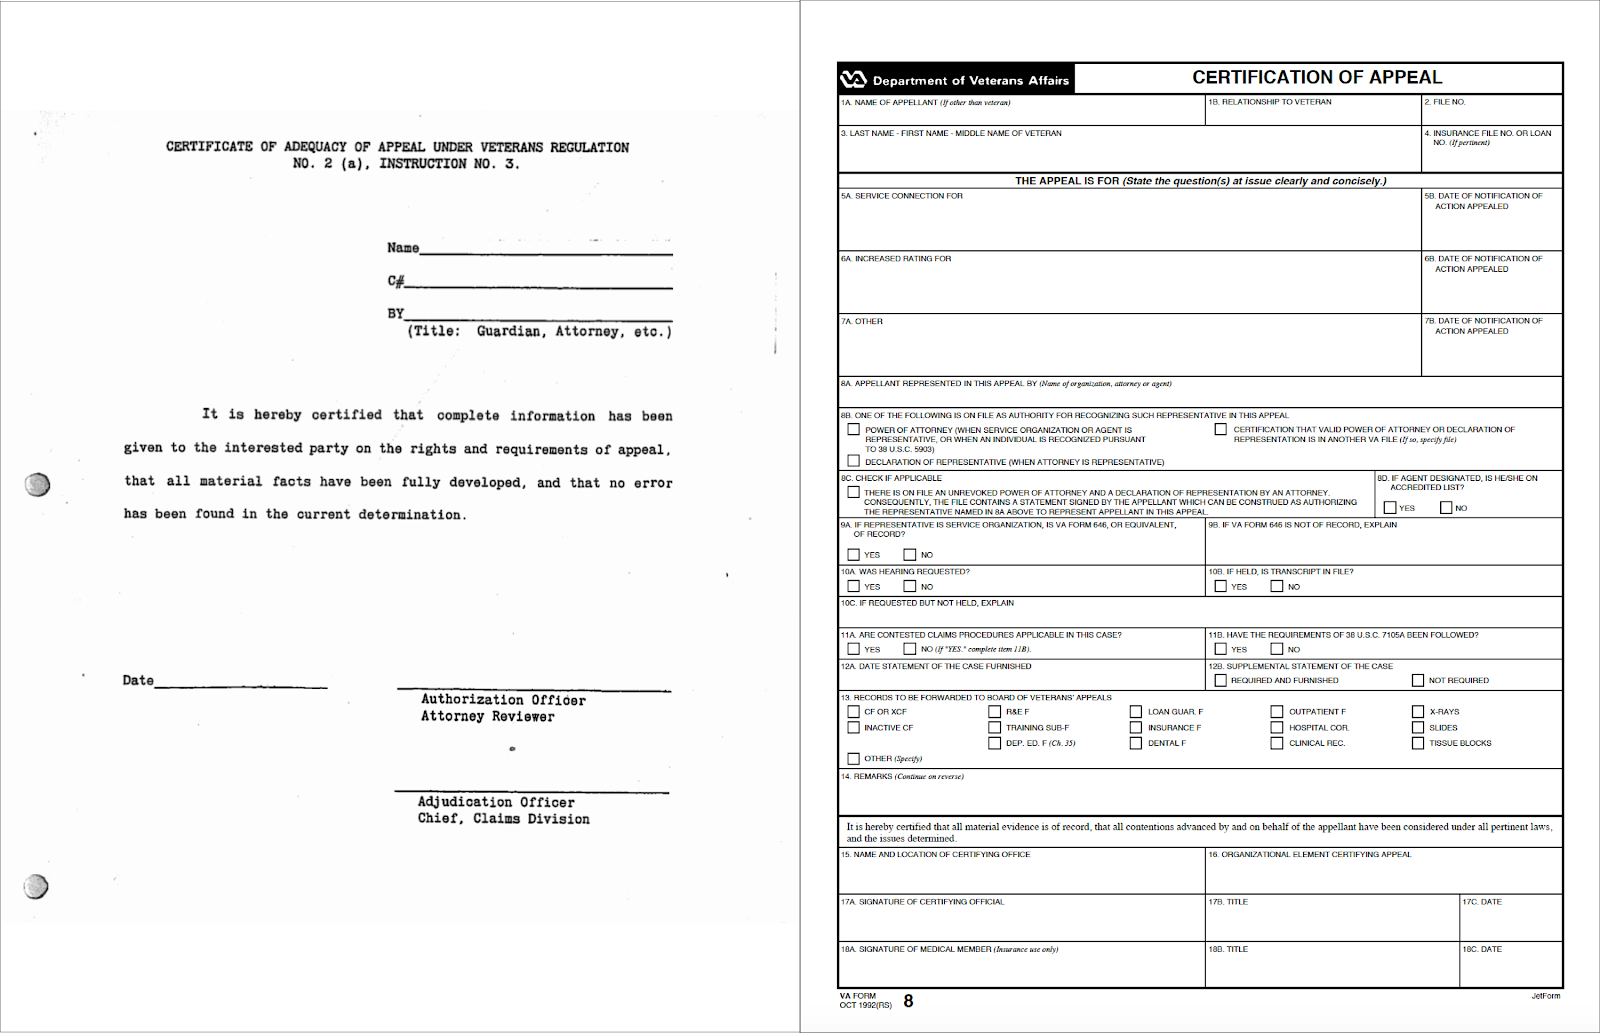 Two versions of Form 8 are side-by-side. The one on the left has six blank lines and a short paragraph of text. The one on the right has dozens of blank lines and checkboxes.